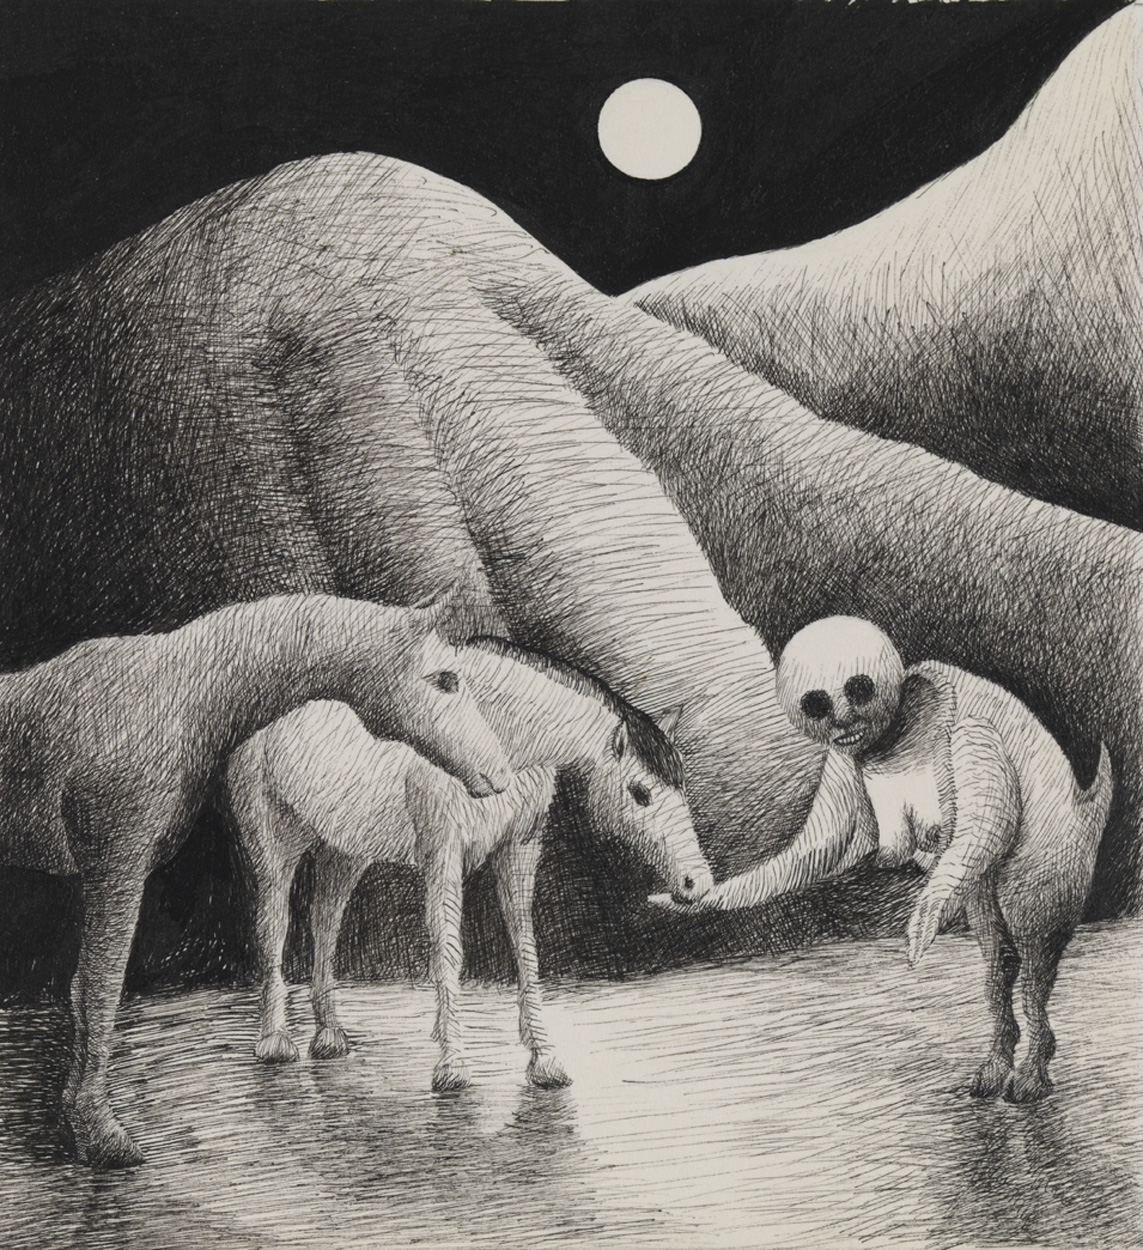 [Creature with two horses]